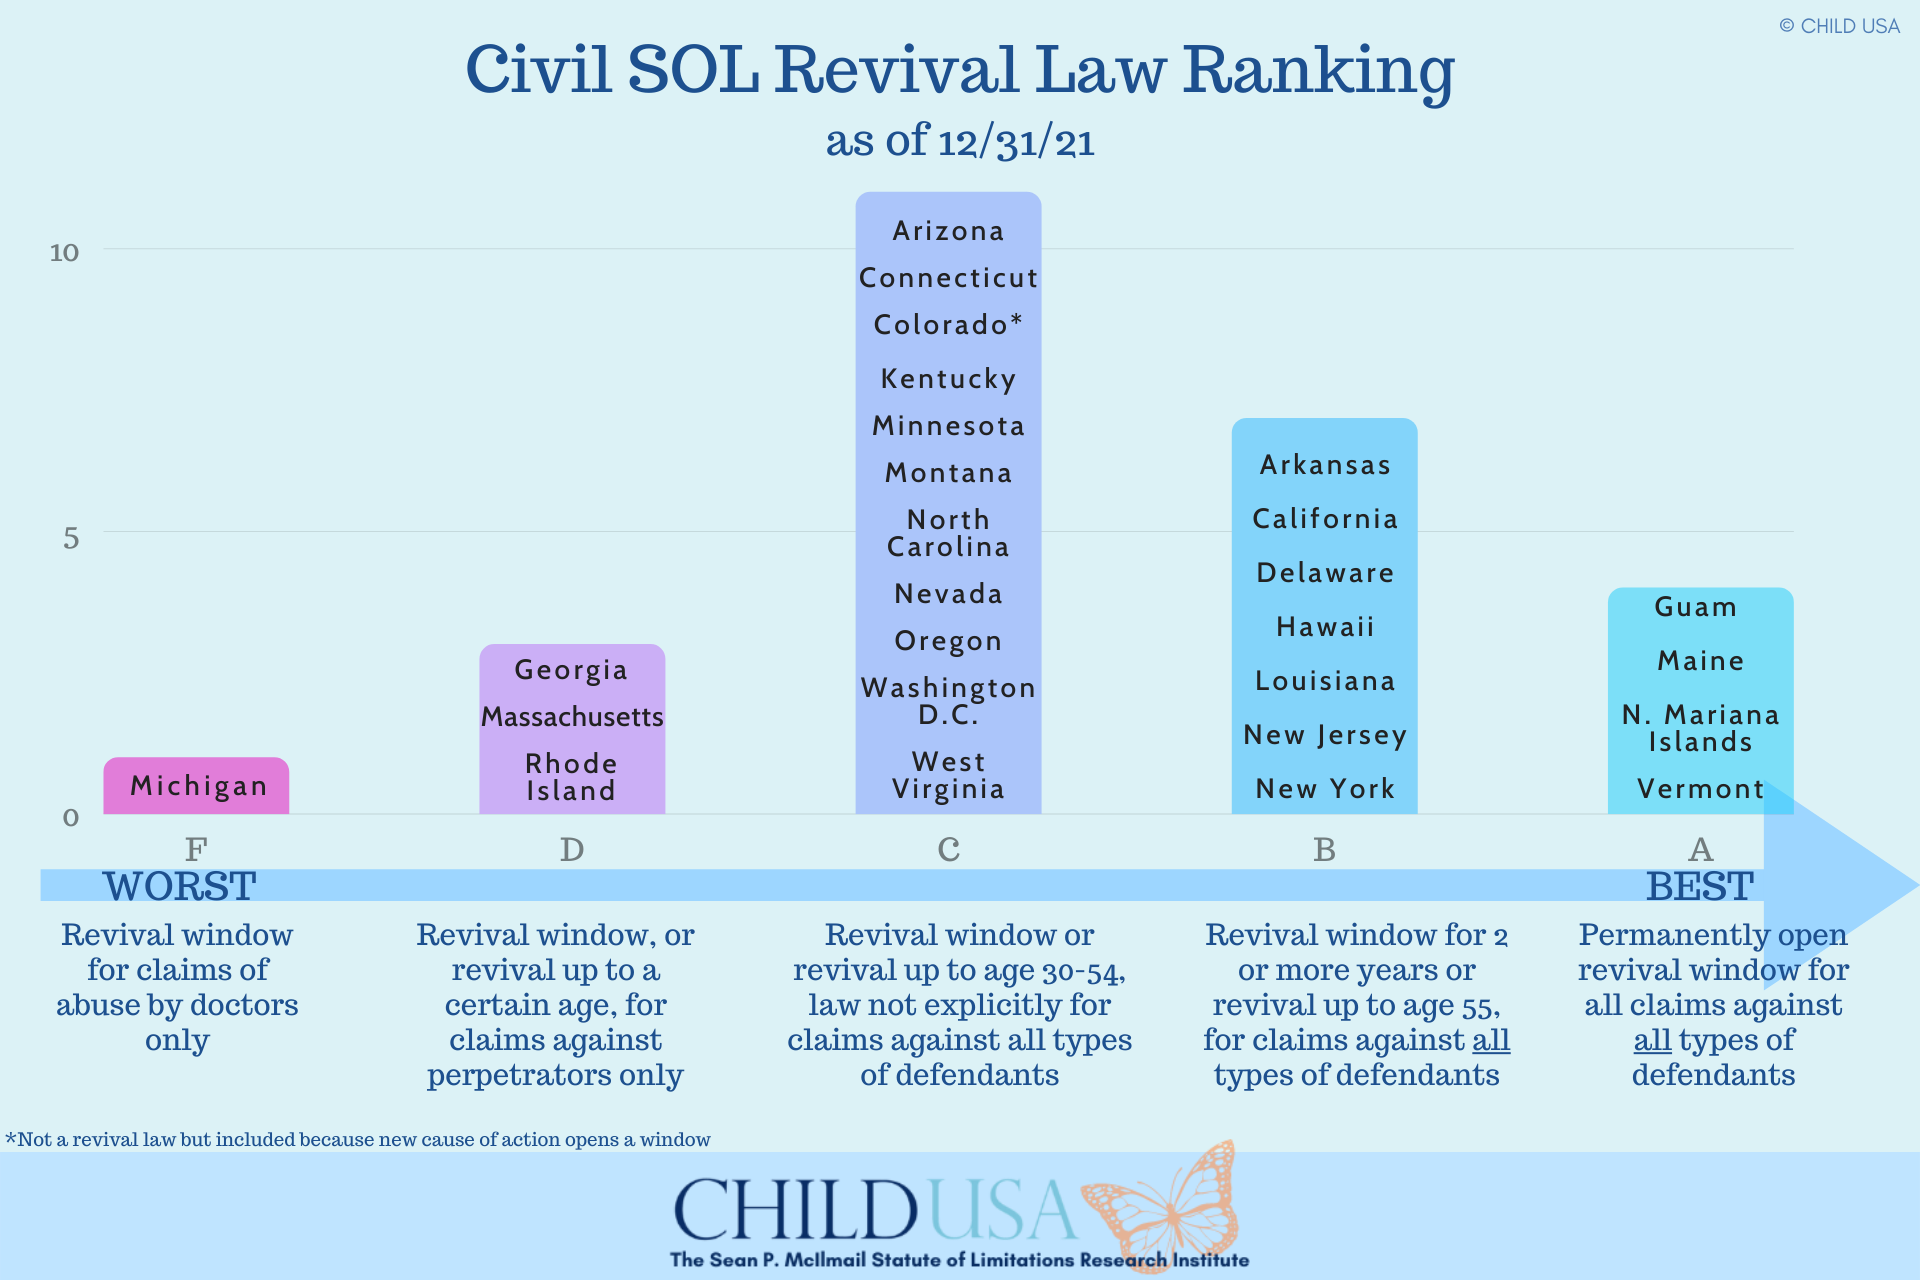 NEW 2021 Revival Law Ranking